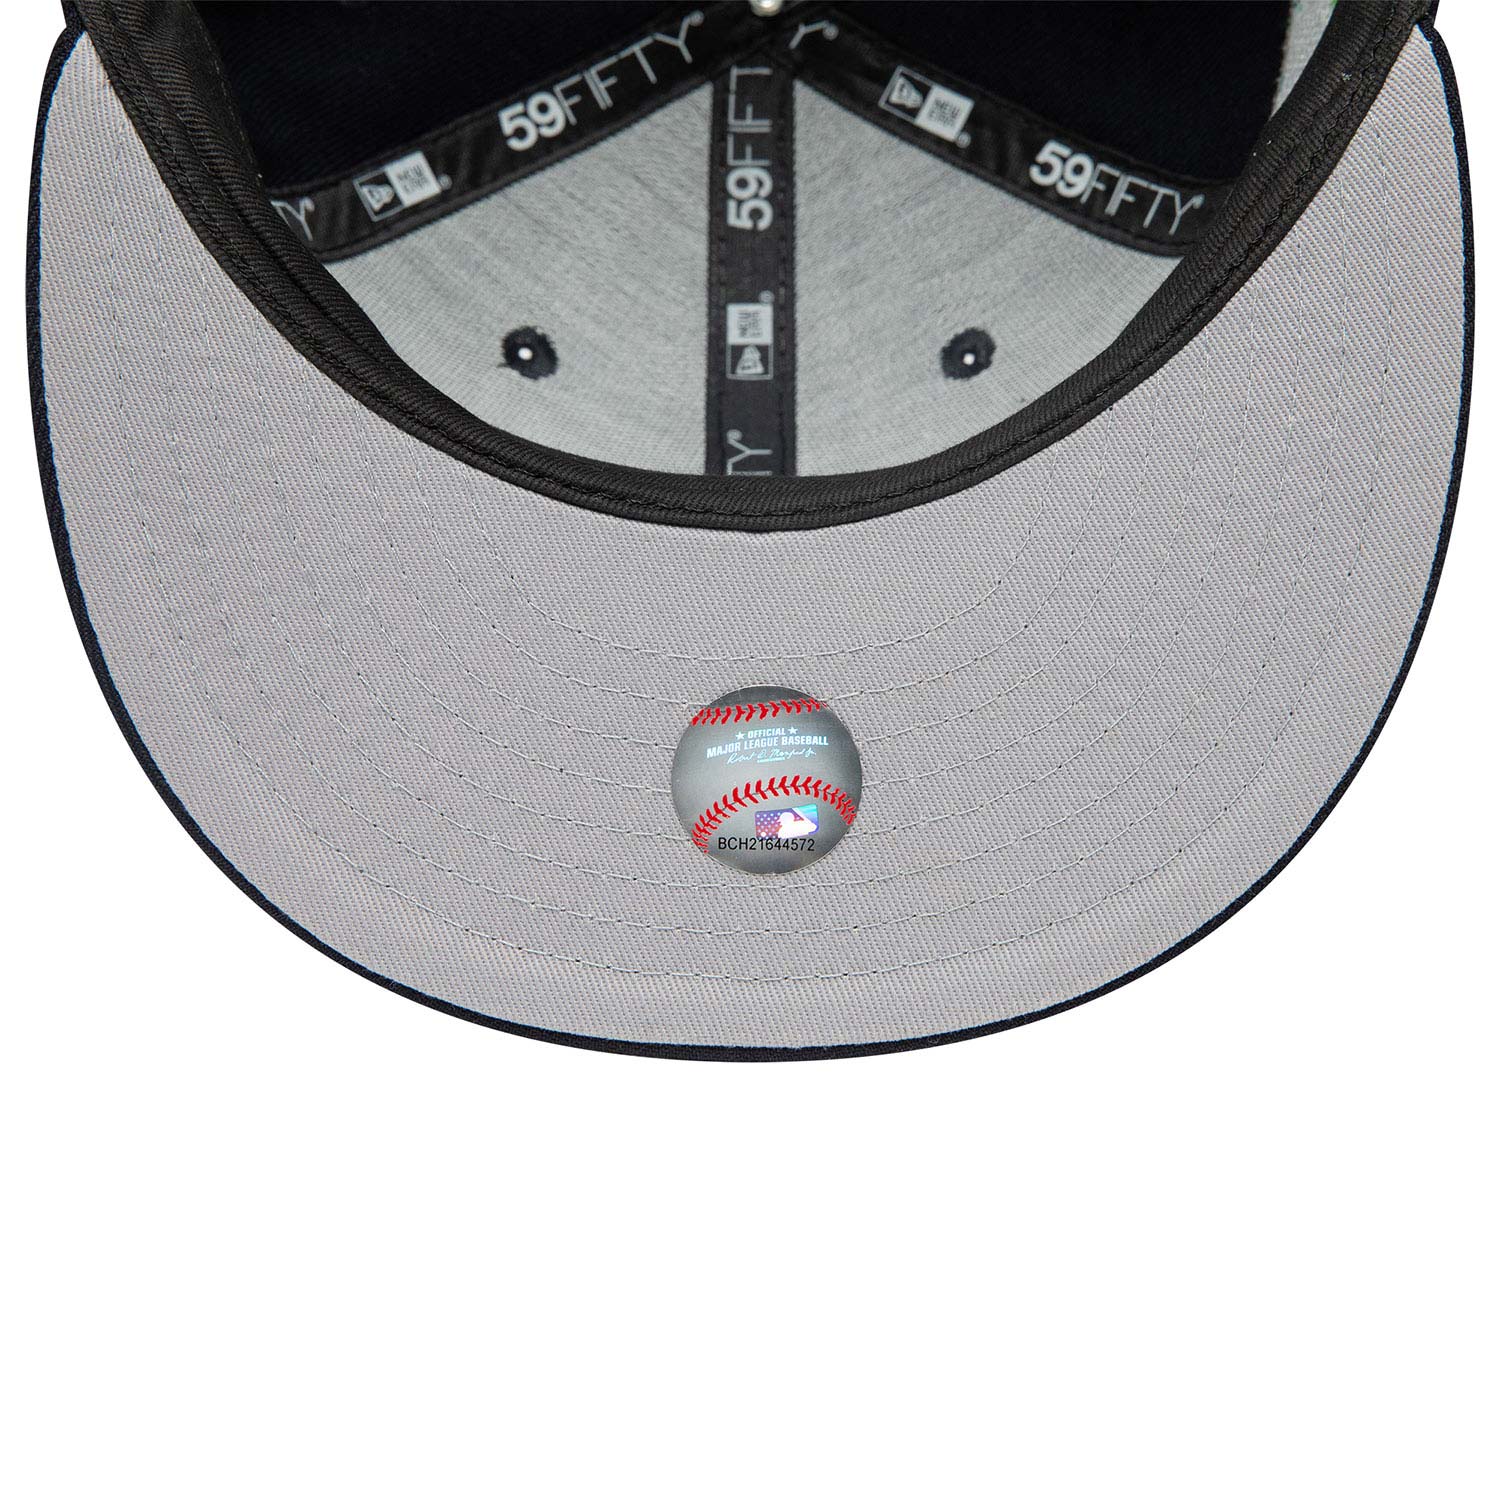 Boston Red Sox Stateview Navy 59FIFTY Fitted Cap